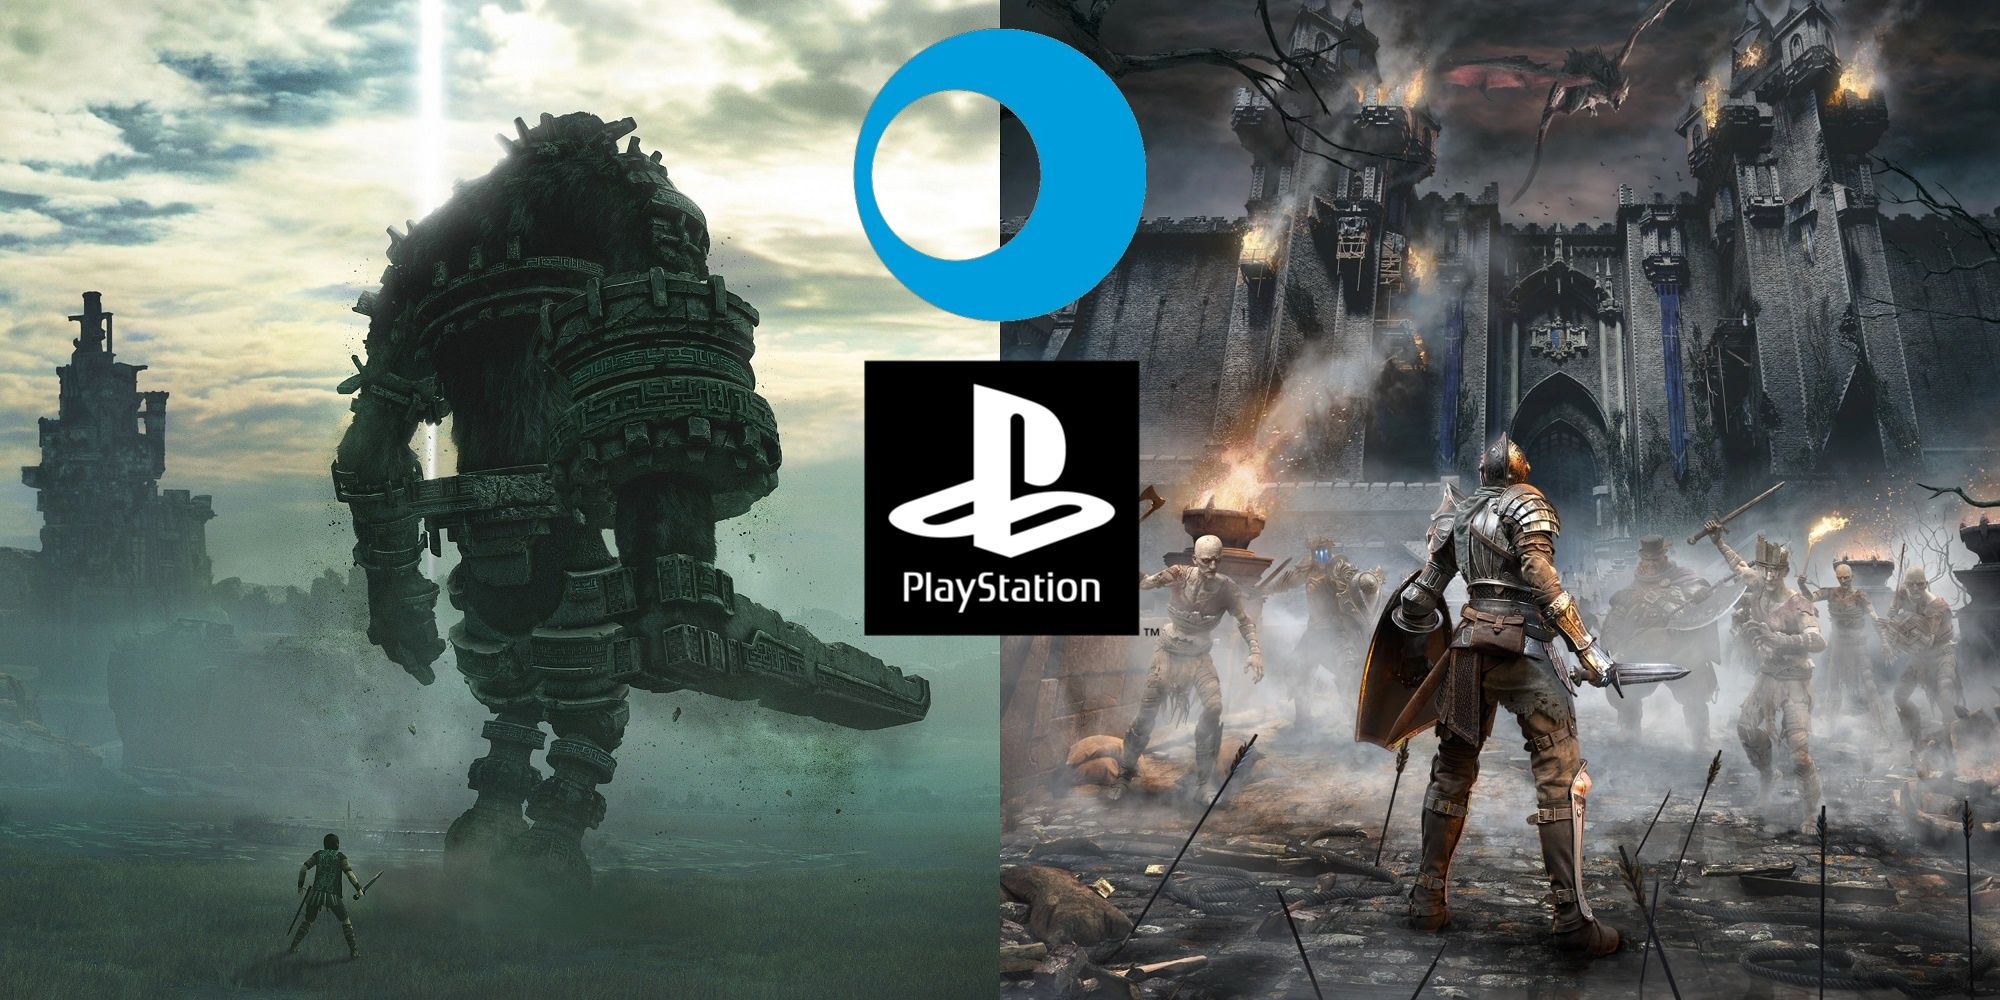 Bluepoint Studios Joins the PlayStation Family